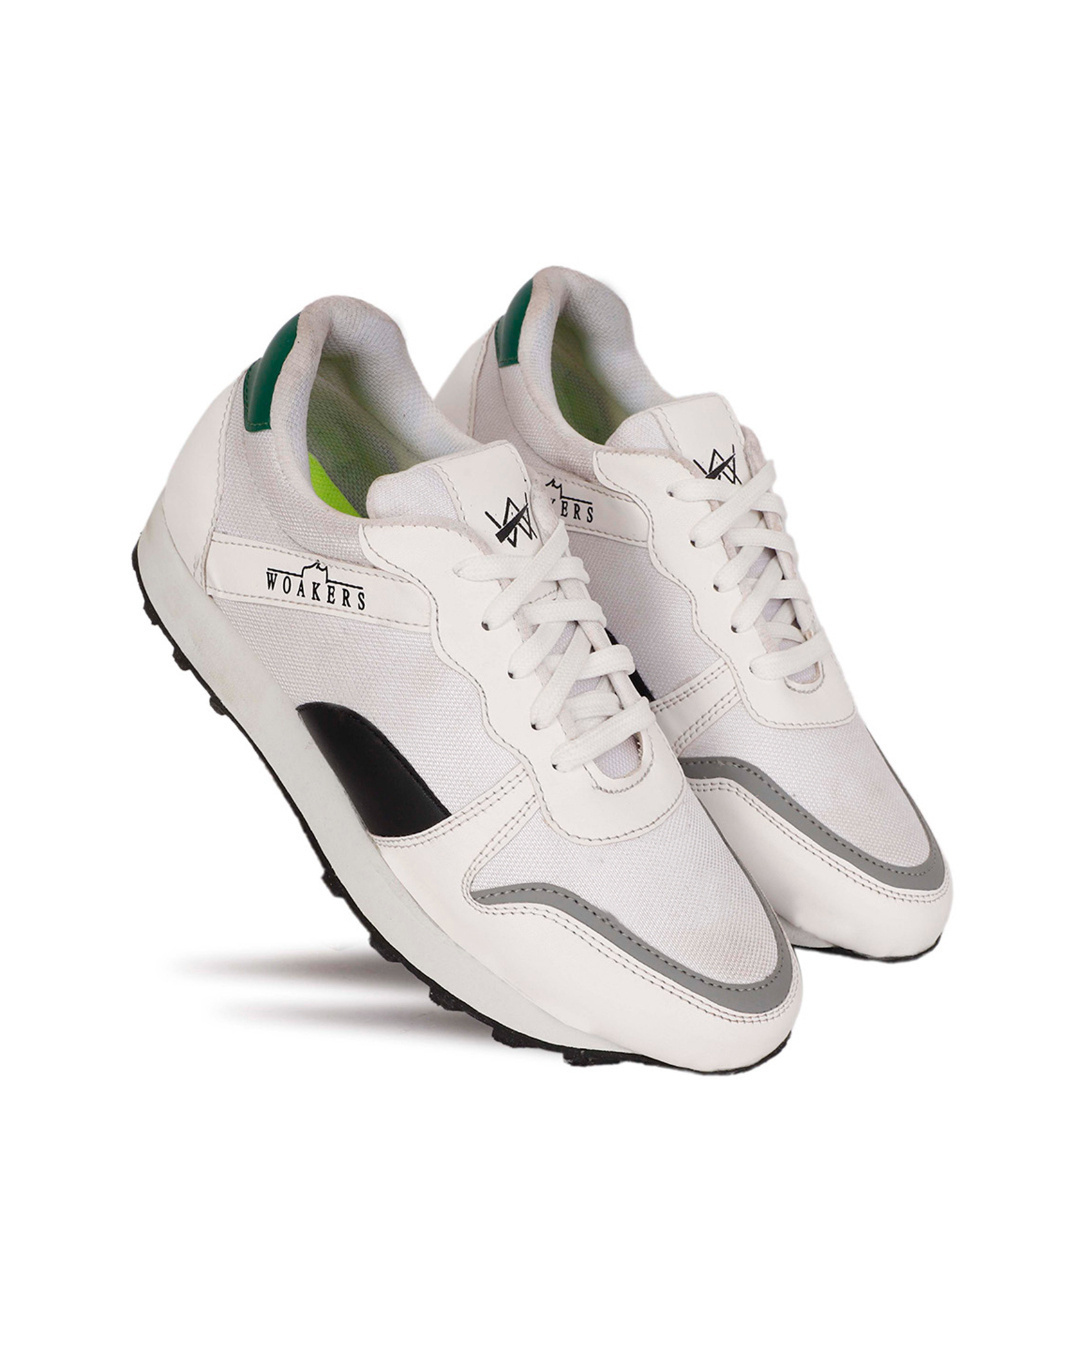 Buy Men's White Sports Shoes Online in India at Bewakoof